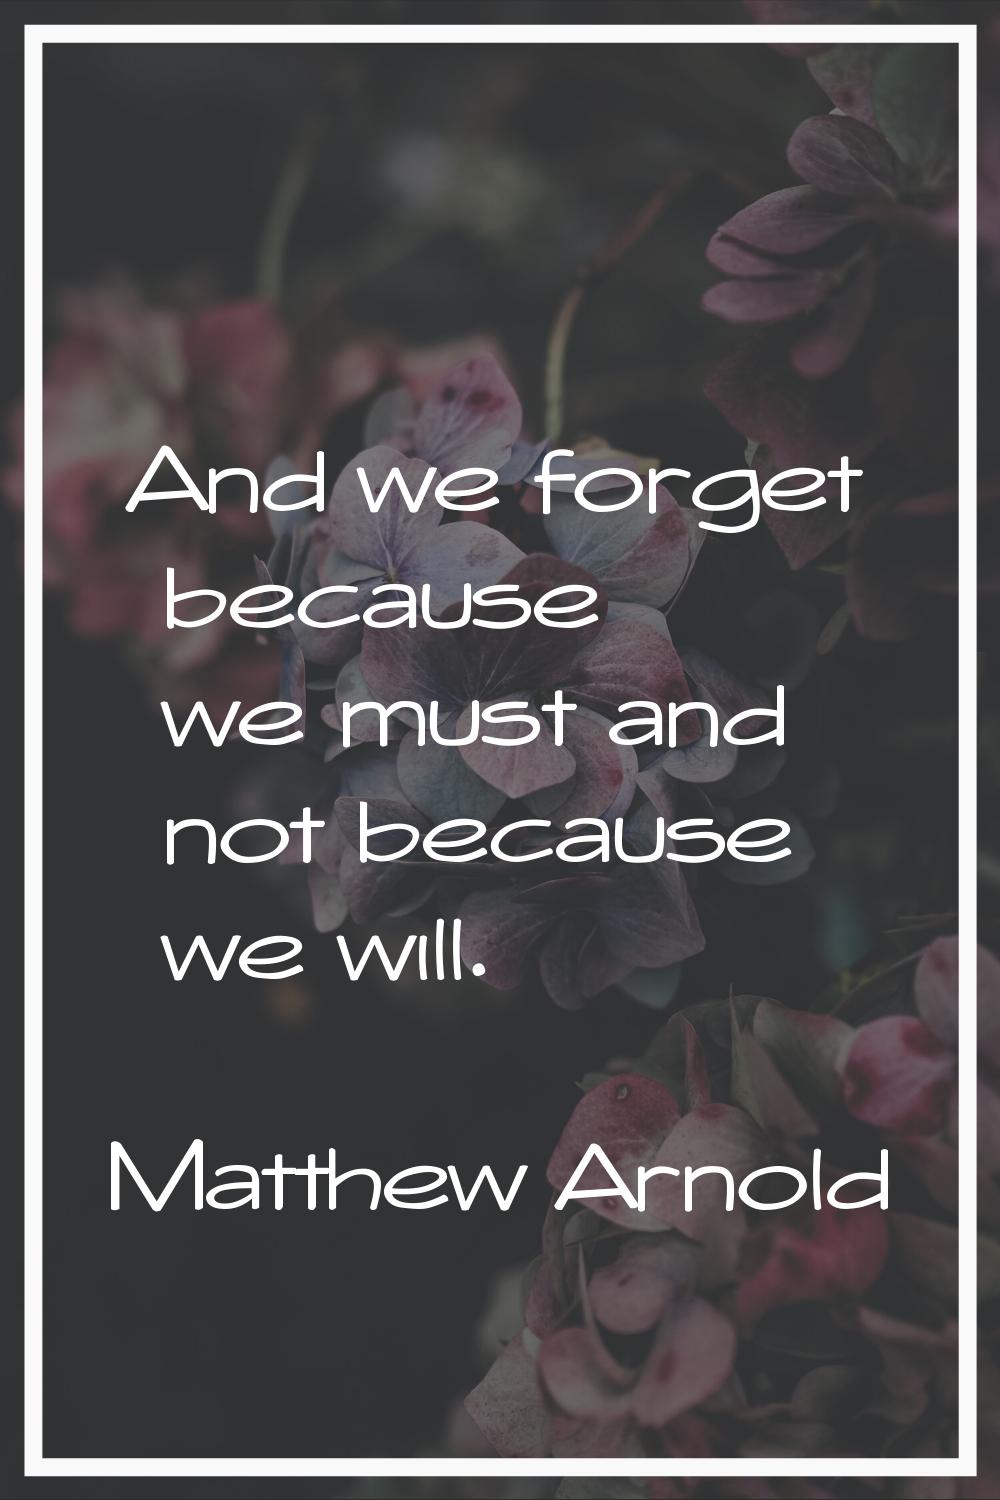 And we forget because we must and not because we will.